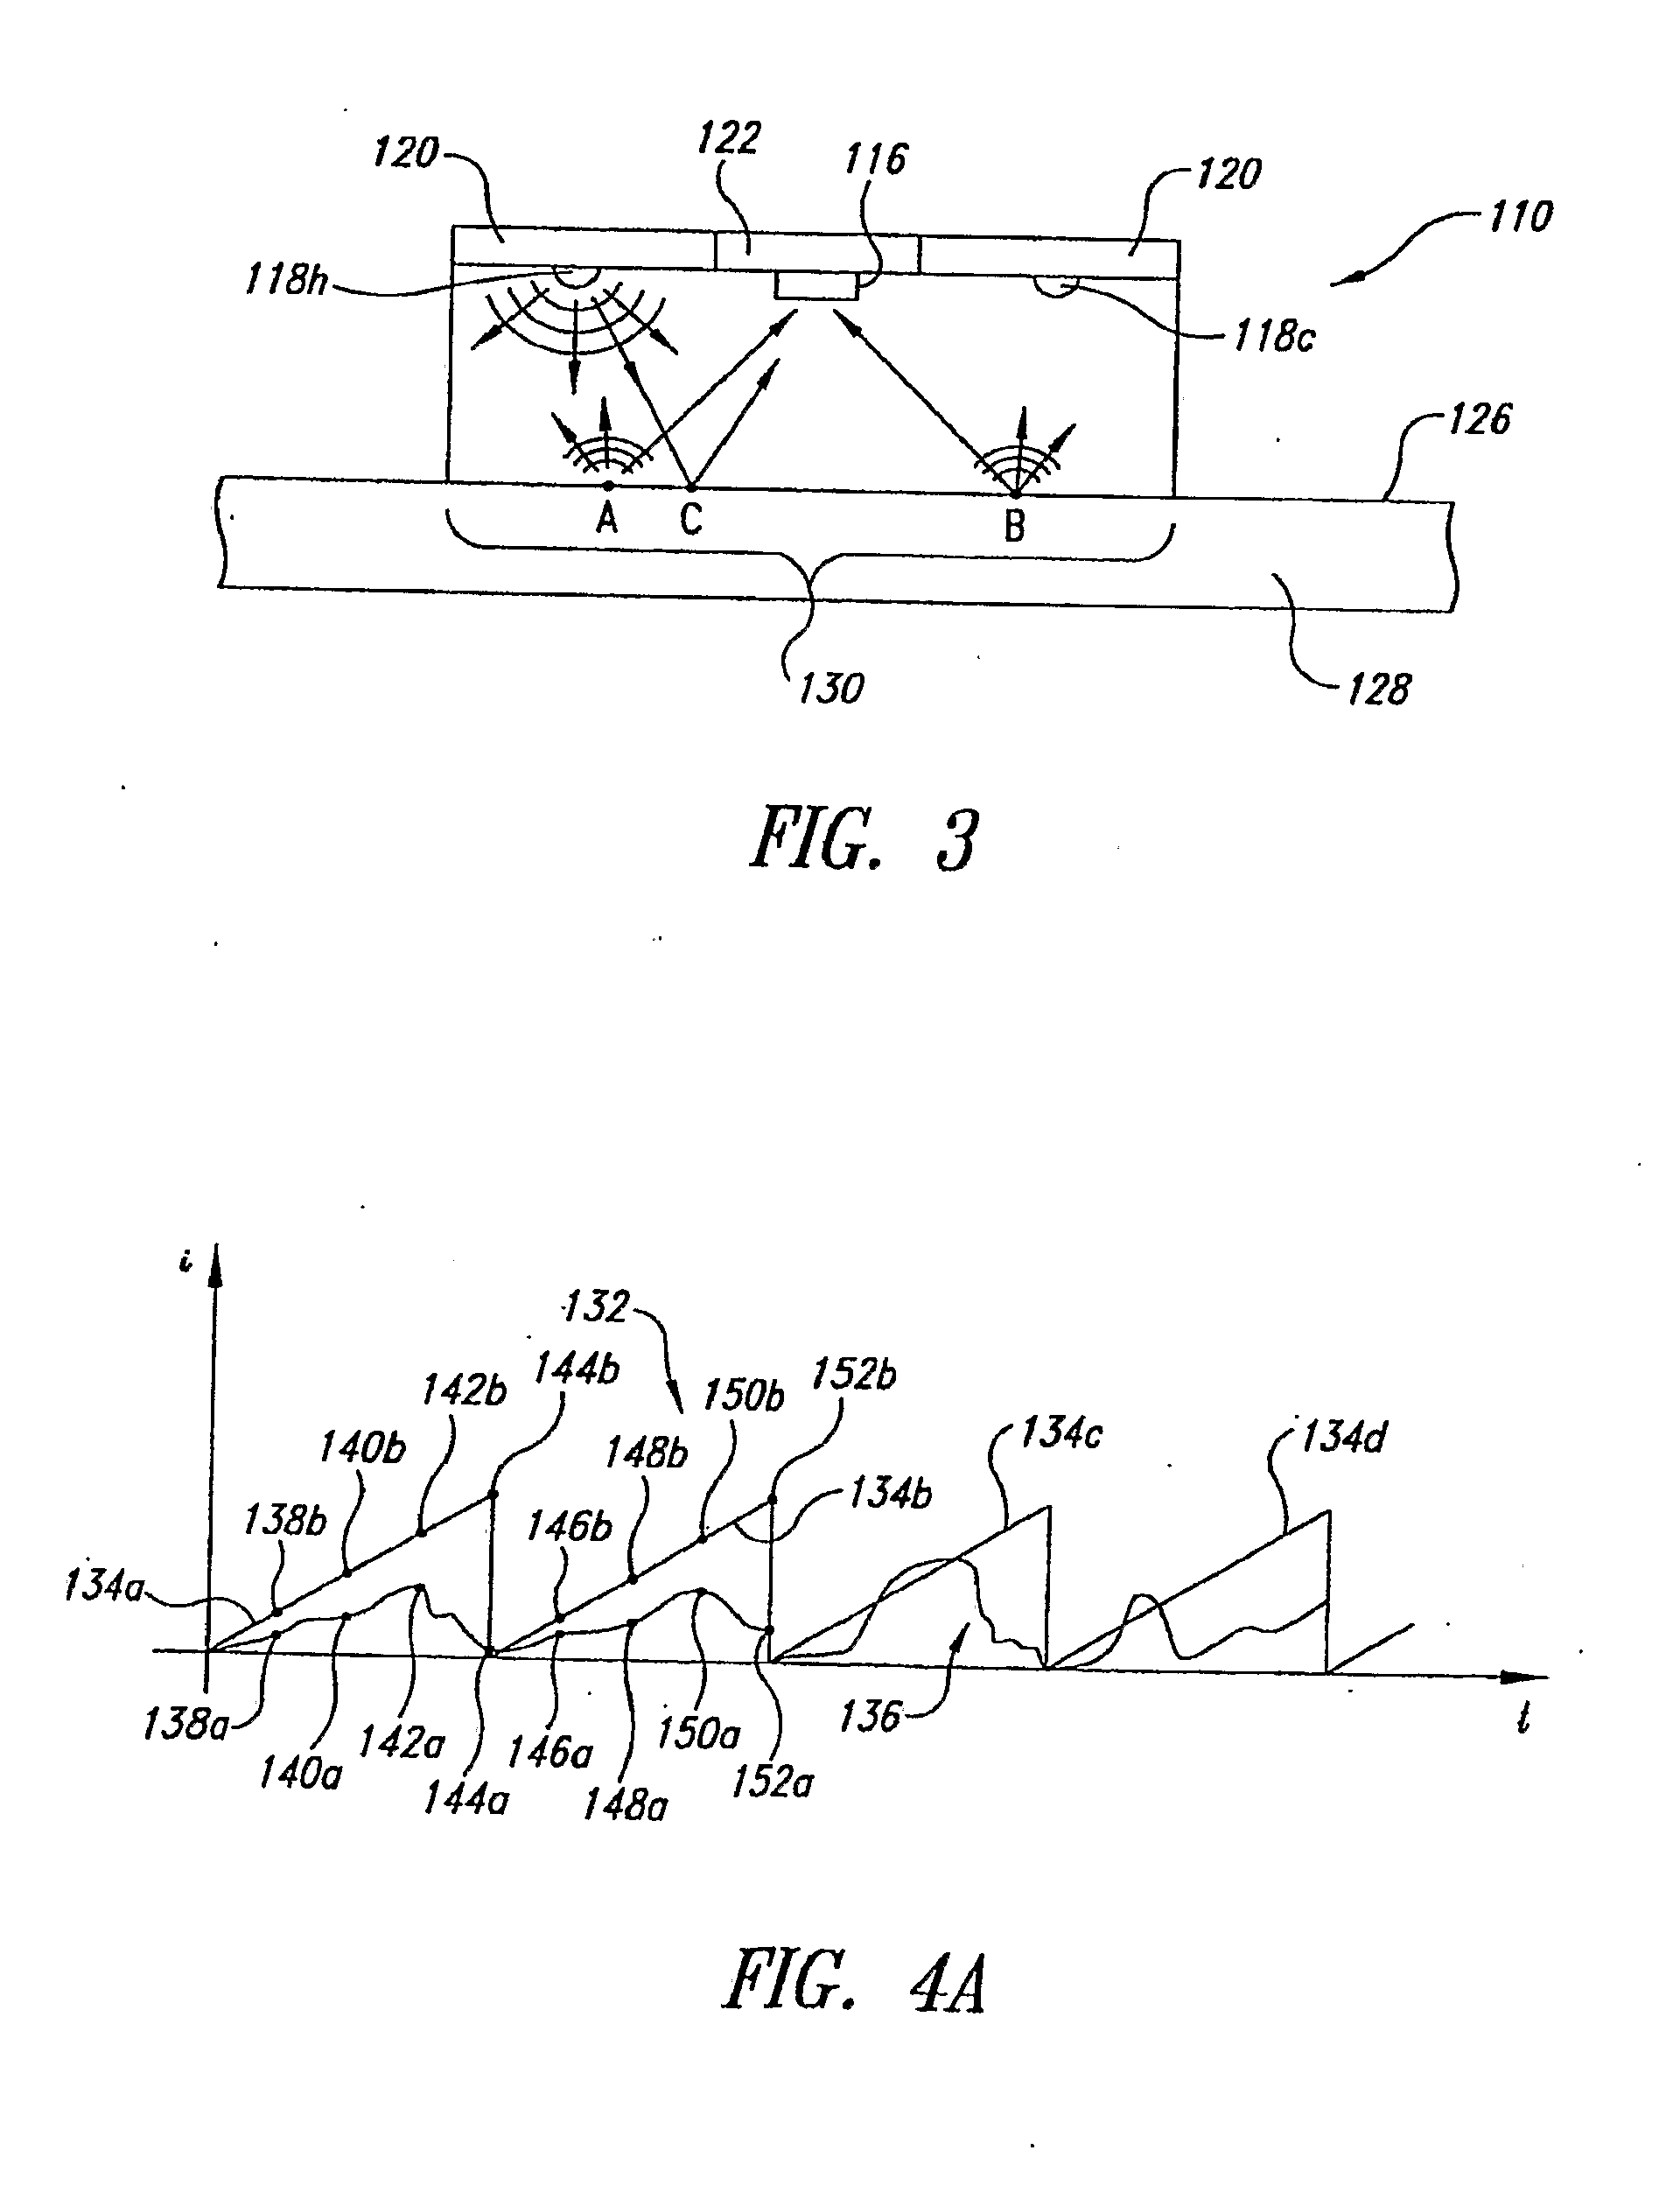 System and method of evaluating an object using electromagnetic energy